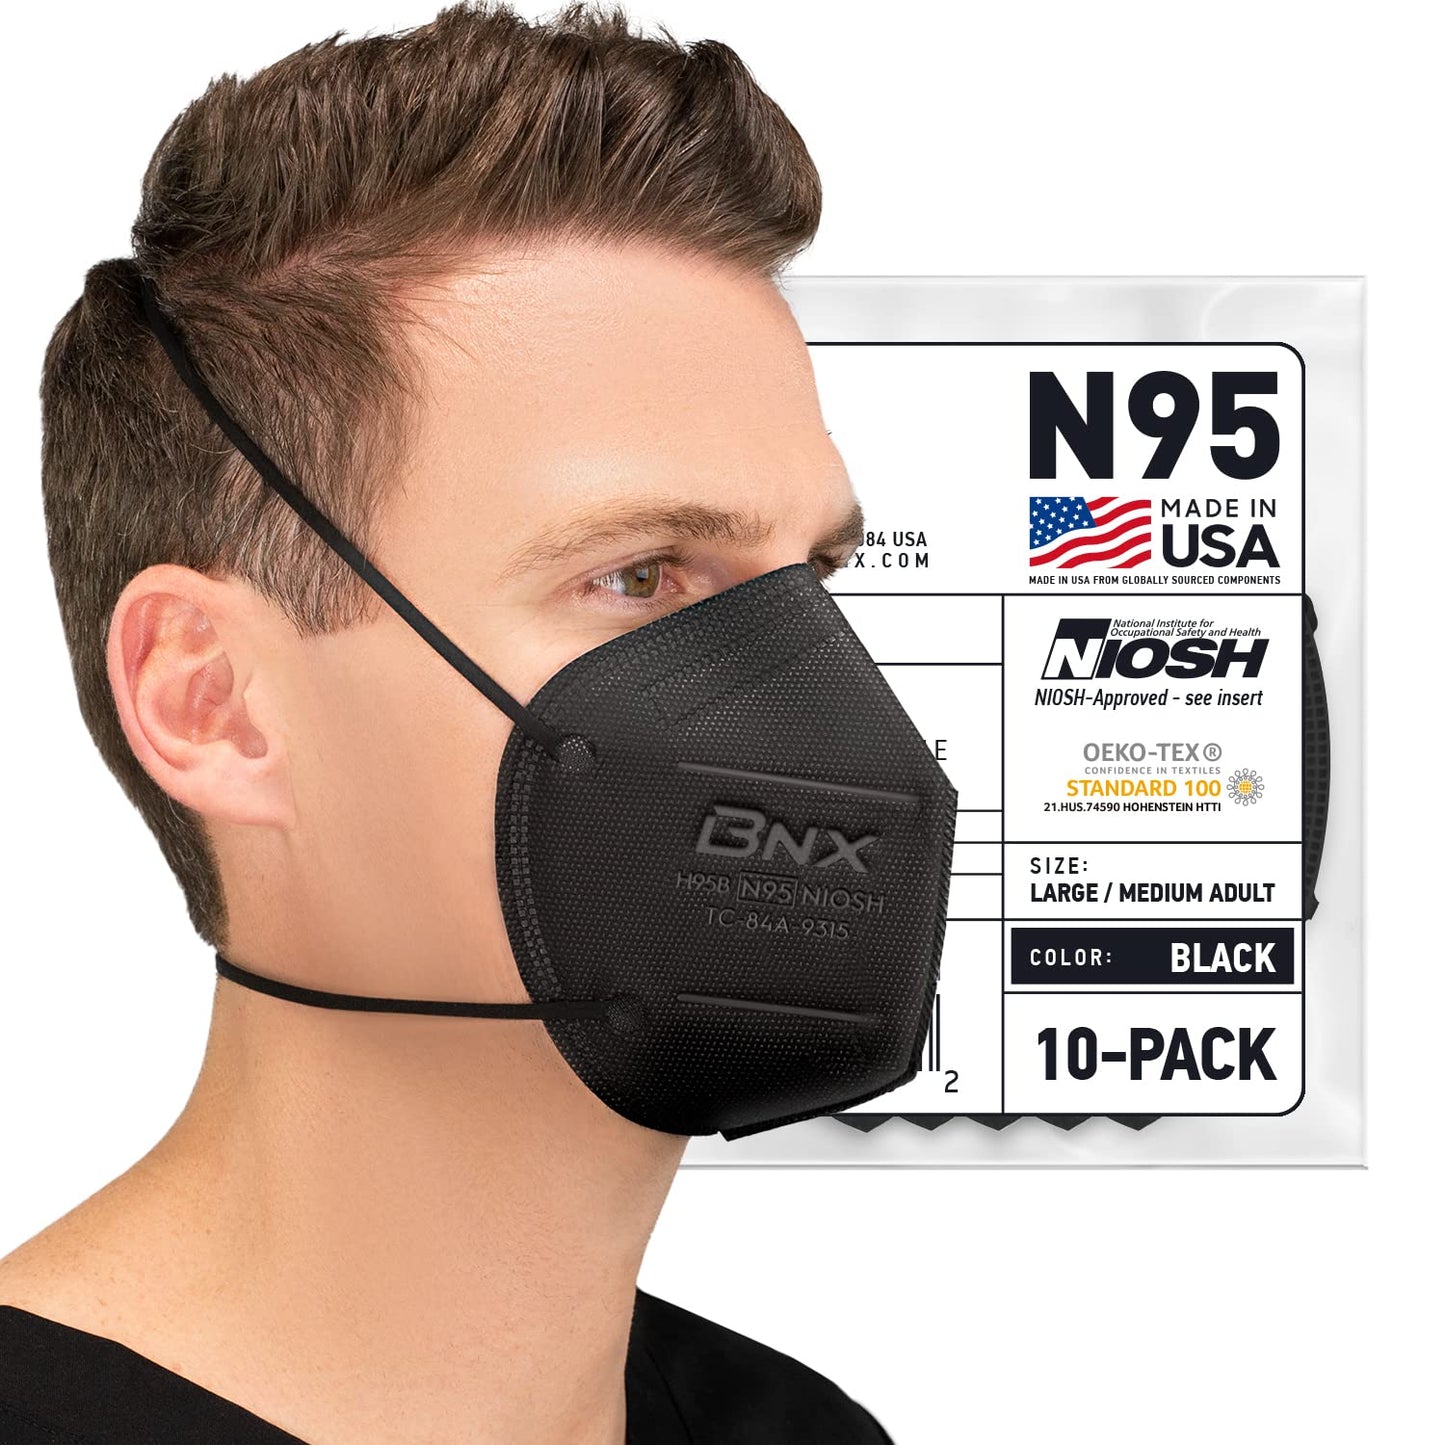 Canadian man wearing Black NIOSH N95 mask with head straps from USA